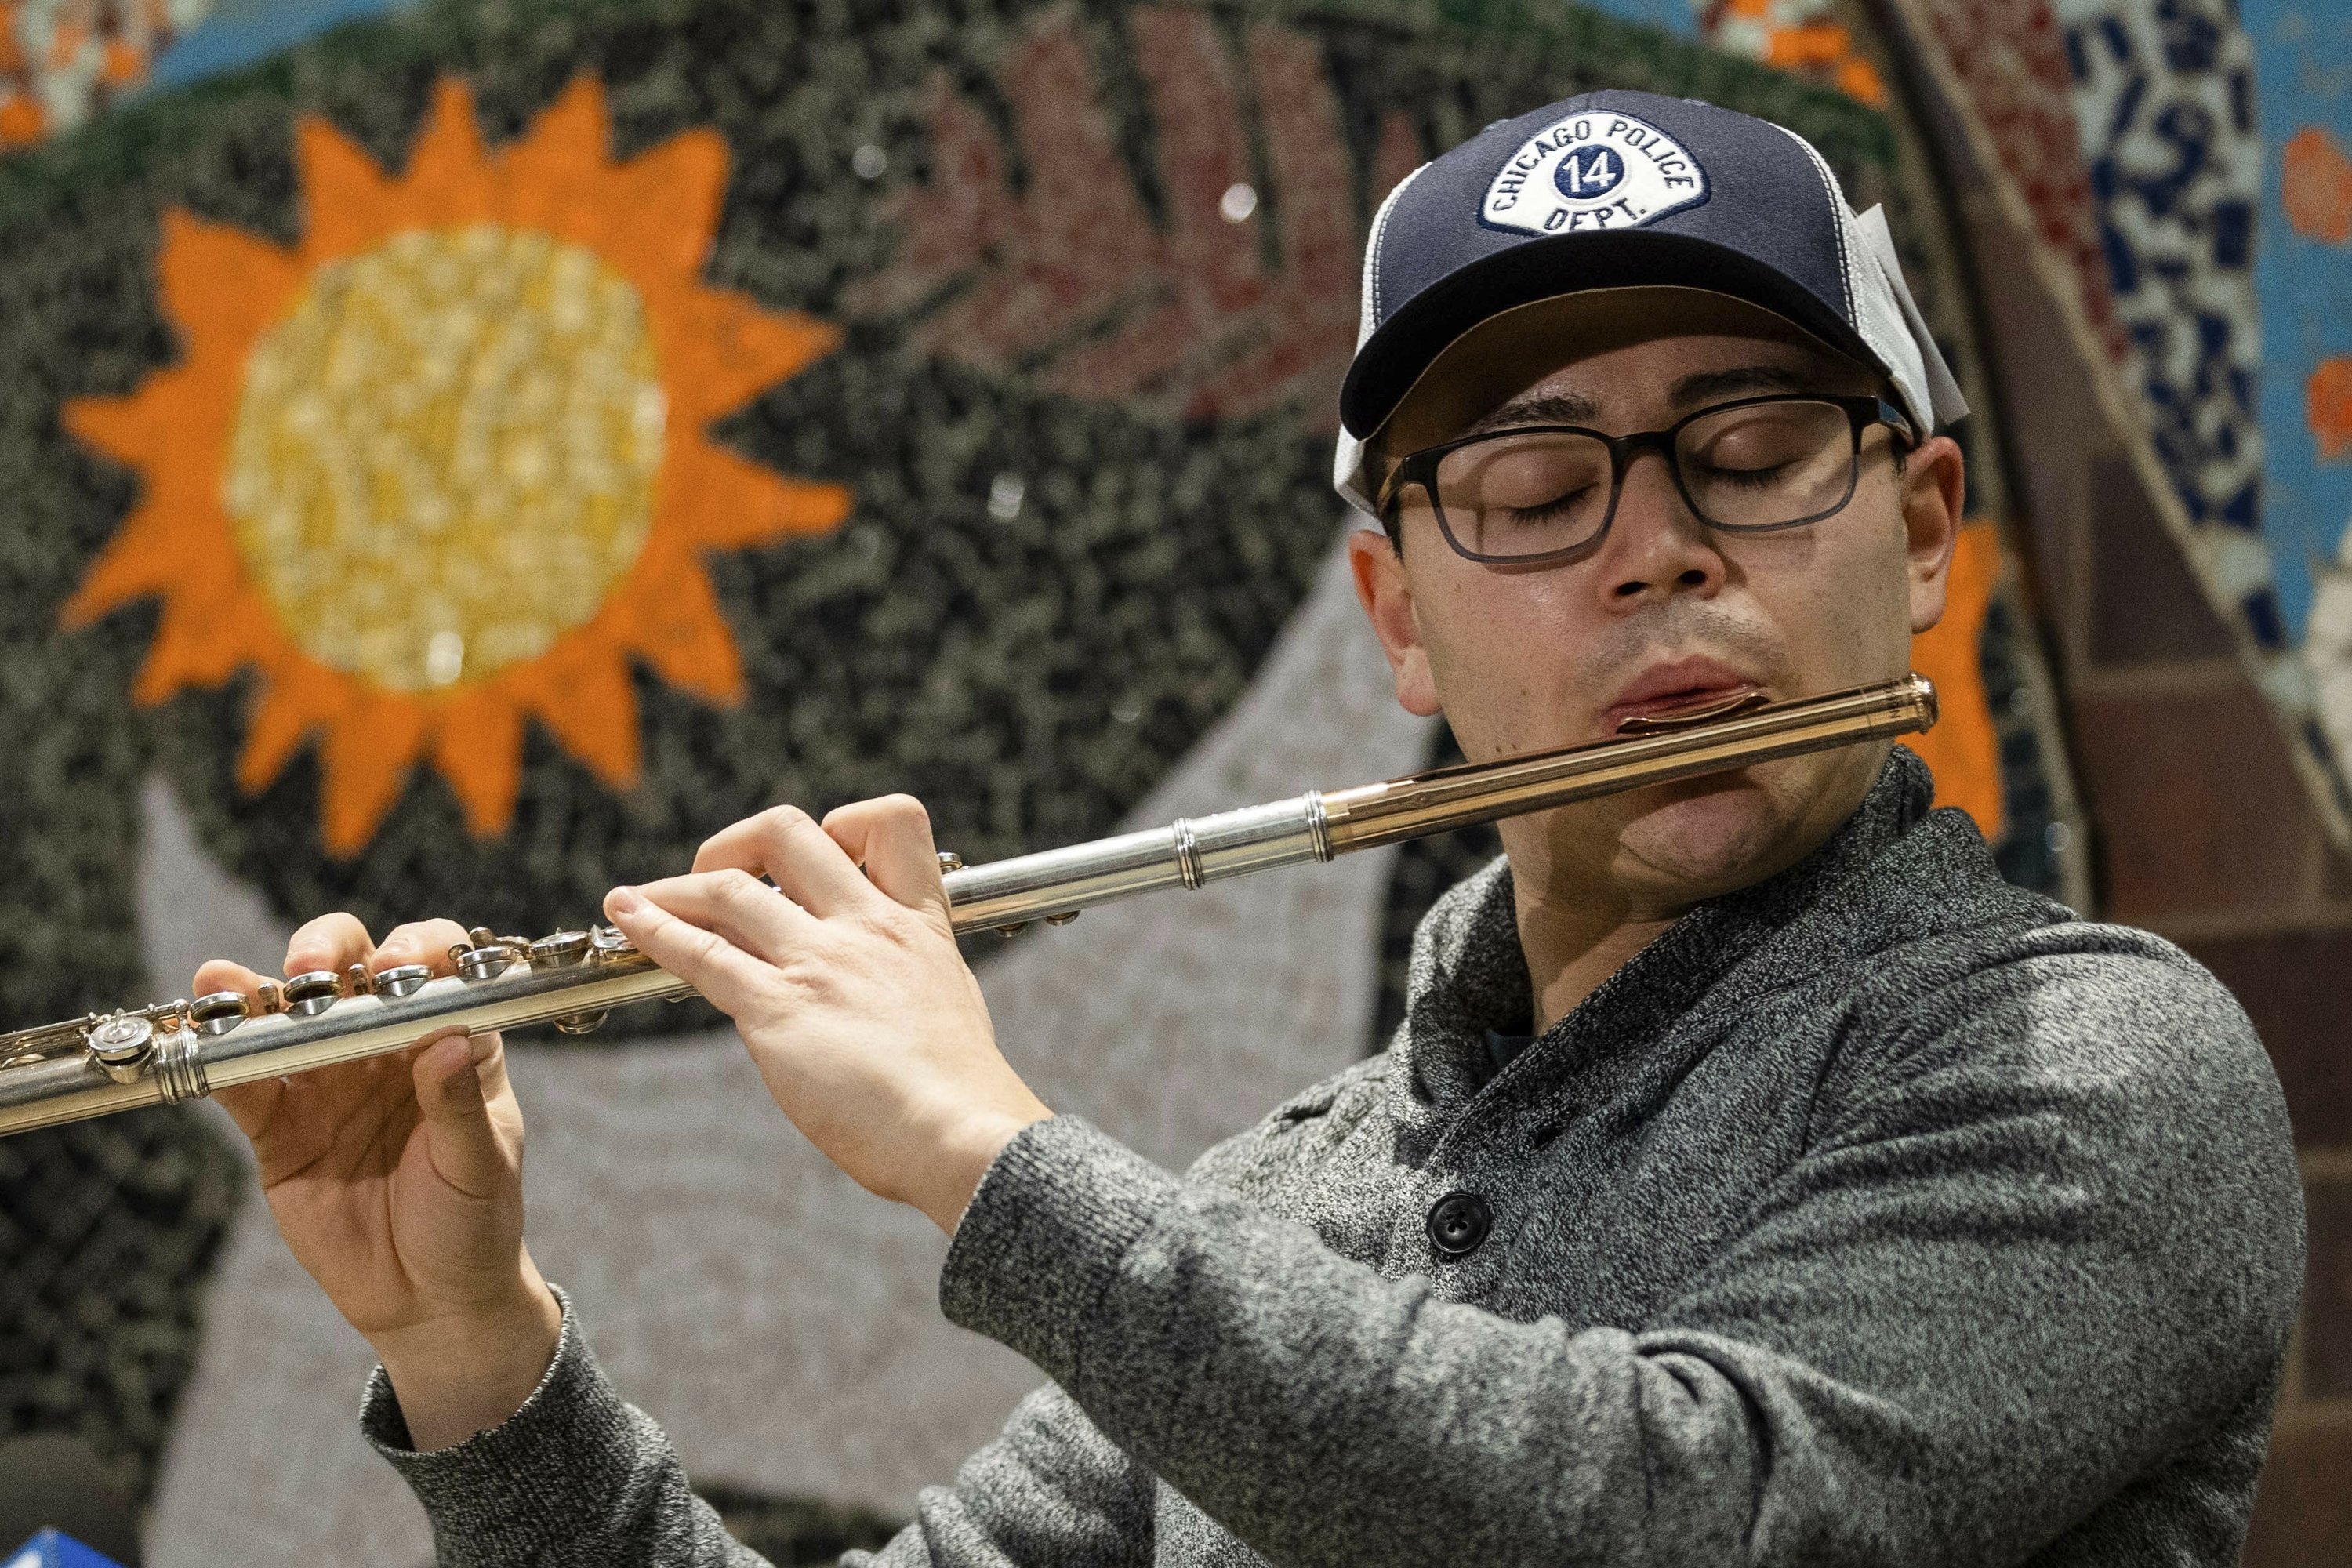 A $ 22,000 flute lost on the Chicago train appears in a pawn shop